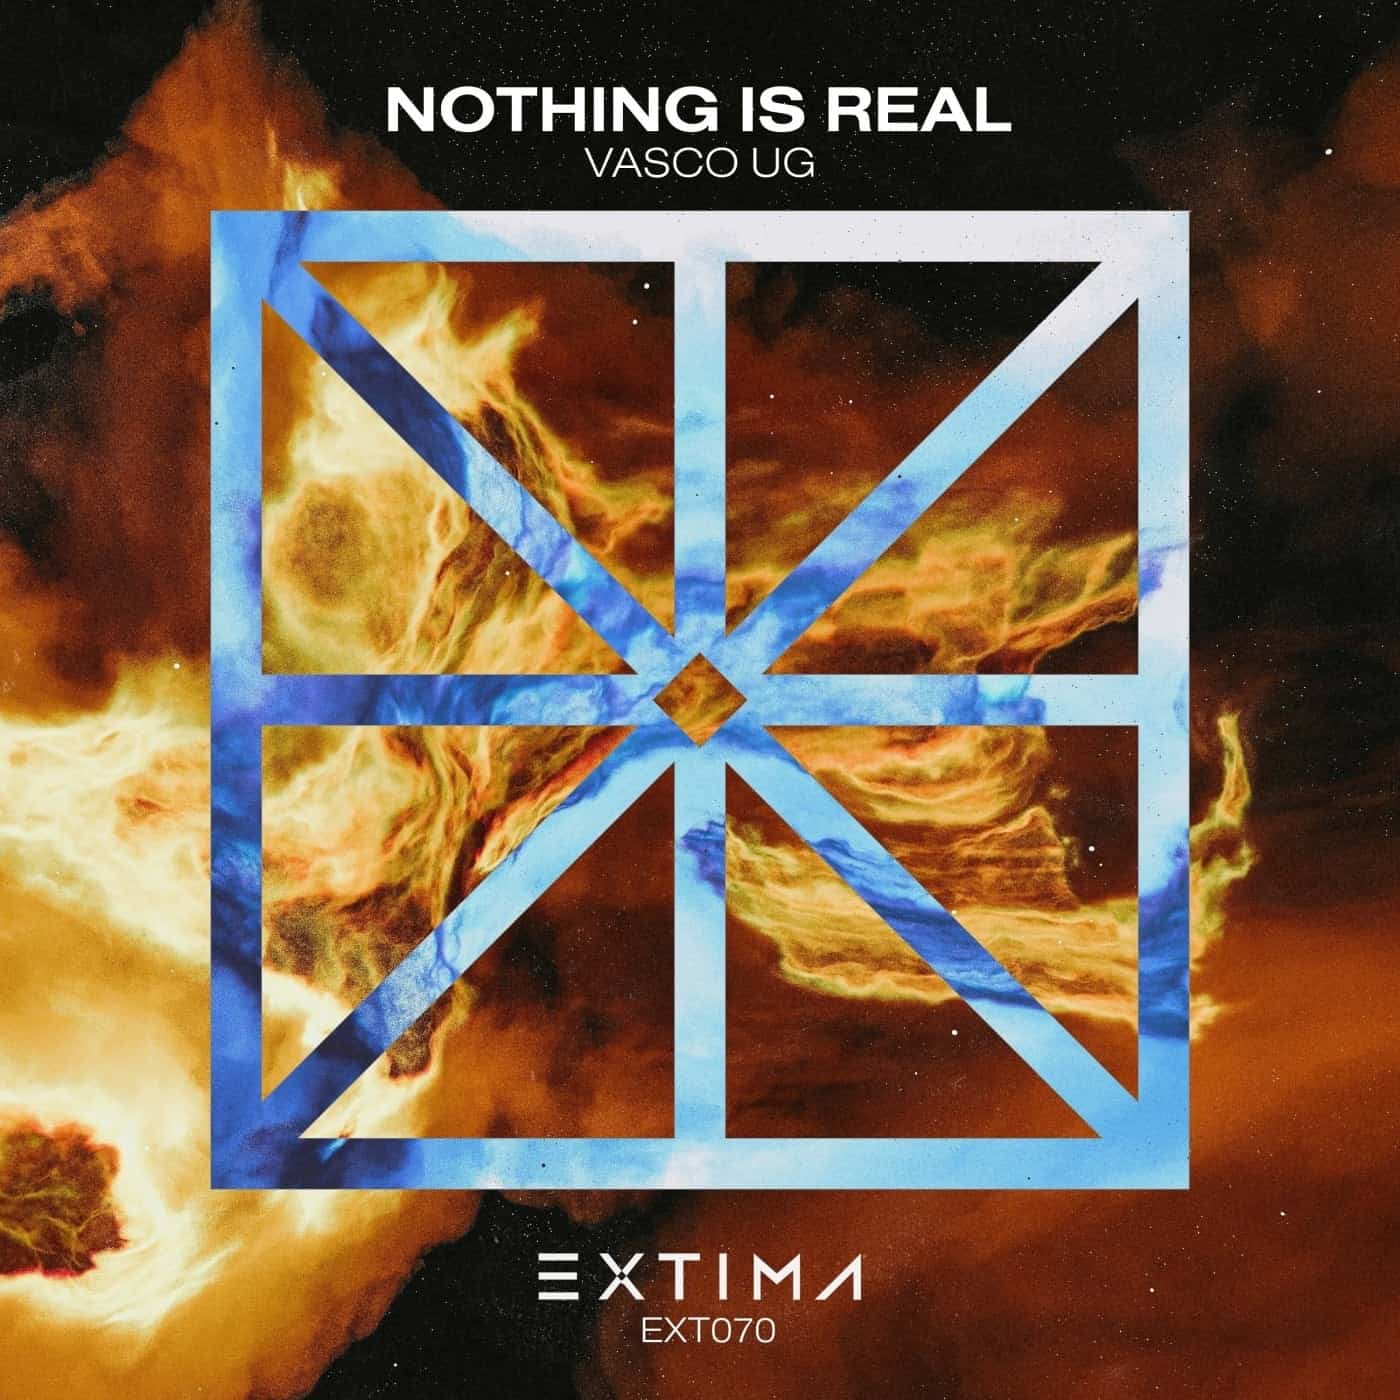 image cover: Nothing Is Real by Vasco UG on EXTIMA